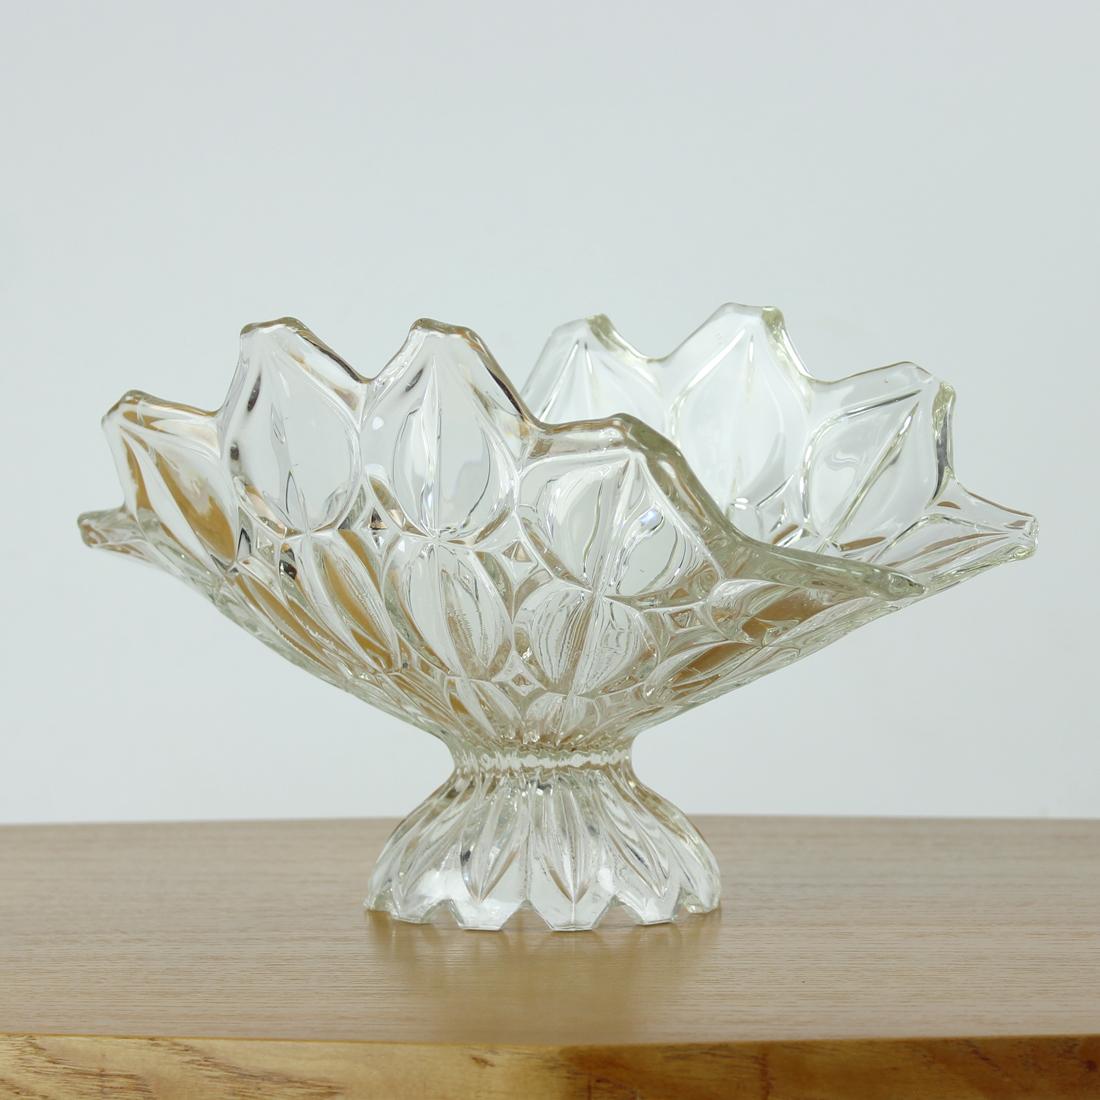 Mid-Century Modern Large Pressed Glass Bowl, Tulip Collection Hermanowa Hut, 1957 For Sale